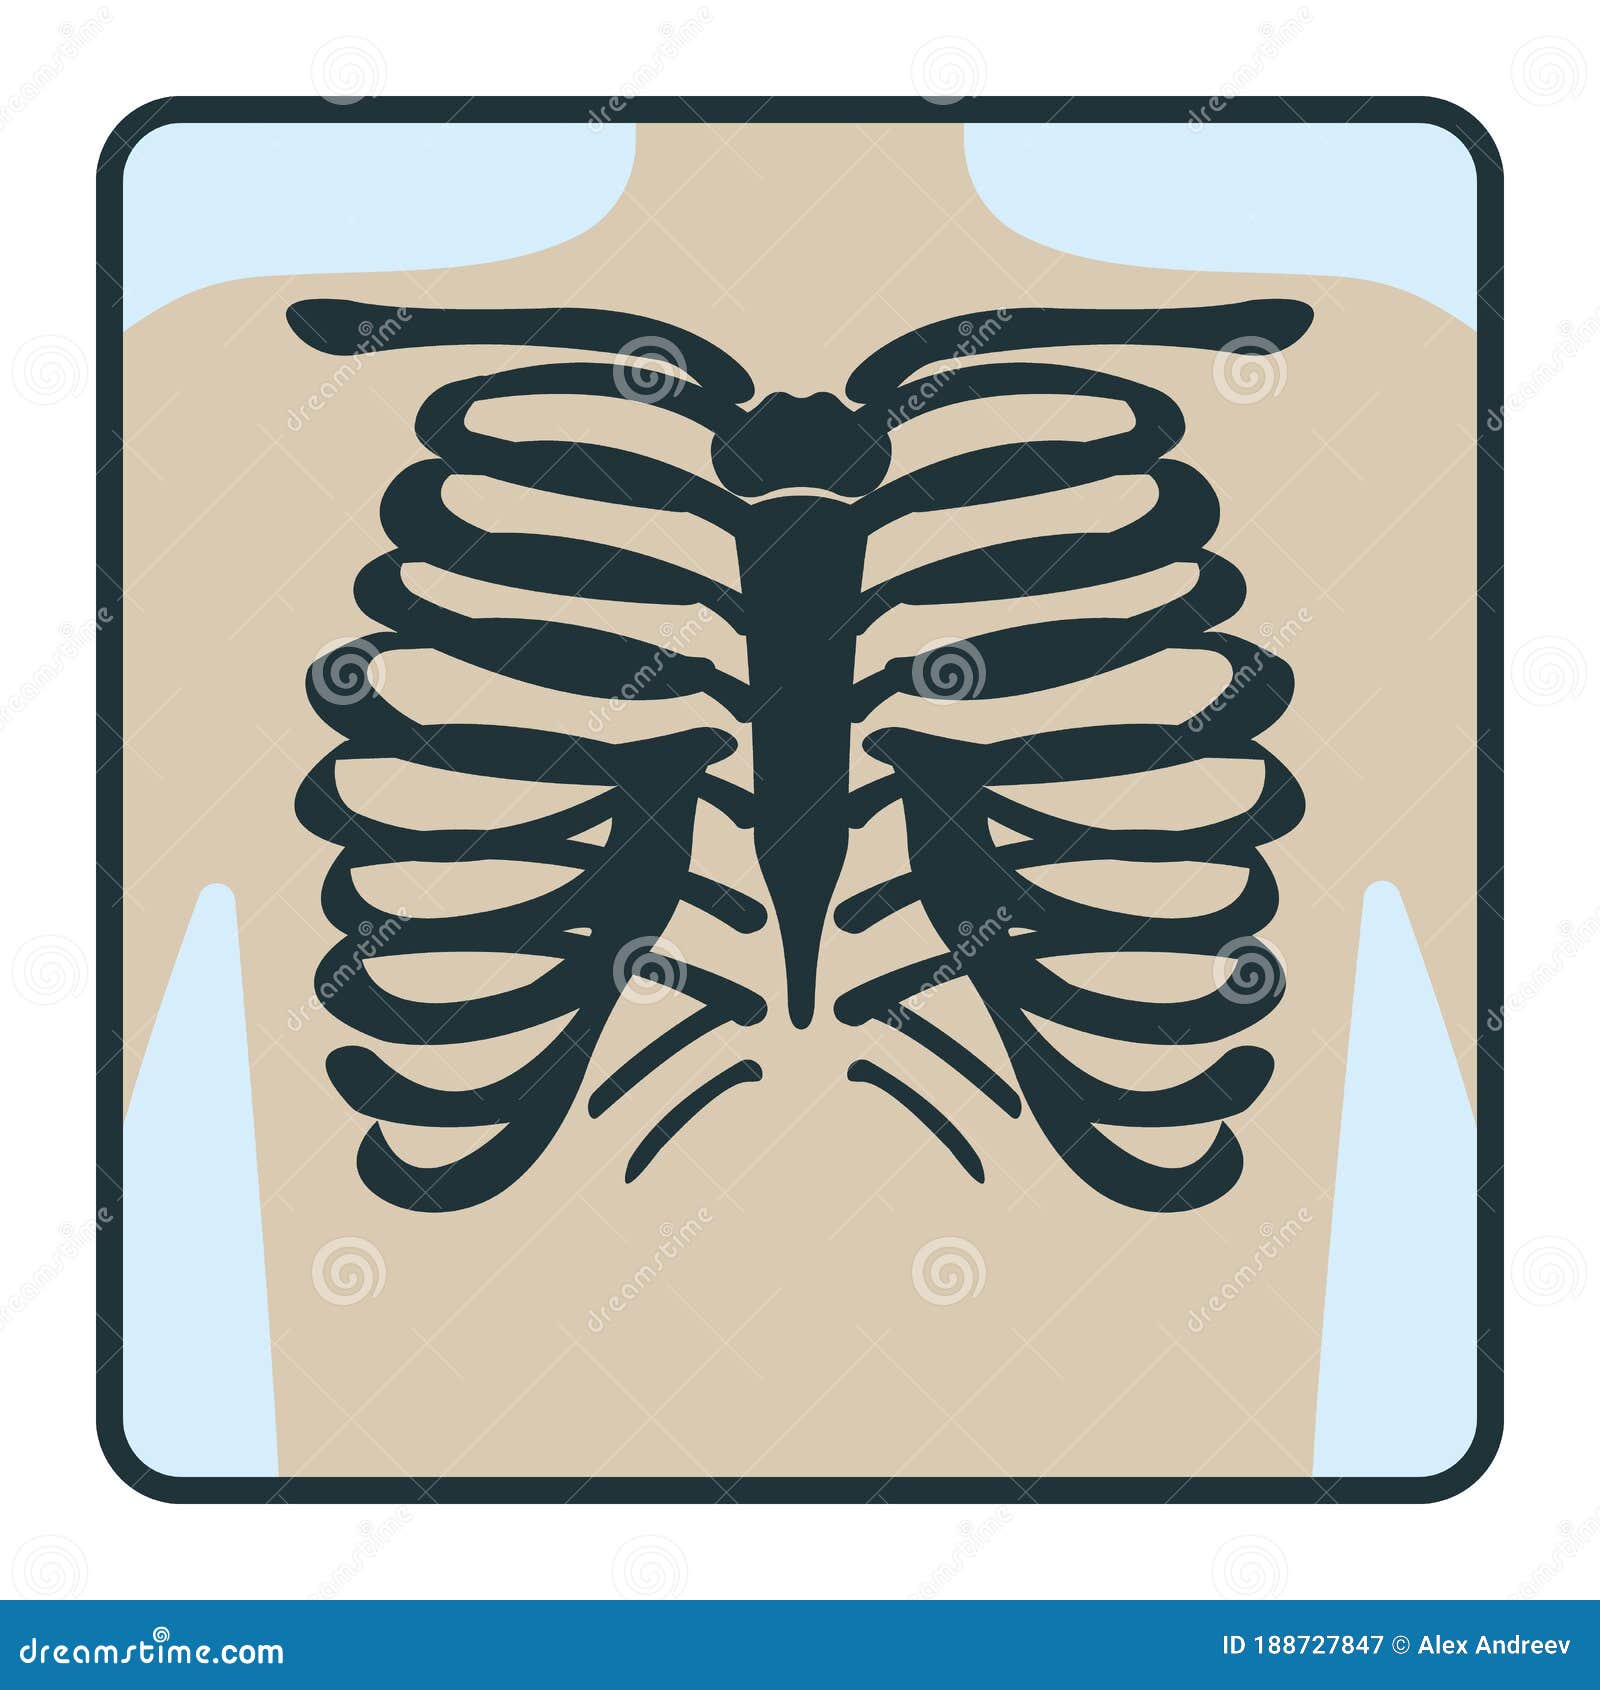 Thoracic Cage Bone, Chest X-ray Concept Icon, Roentgen Human Body Image  Isolated on White, Flat Vector Illustration. Skeleton Part Stock Vector -  Illustration of medical, chest: 188727847